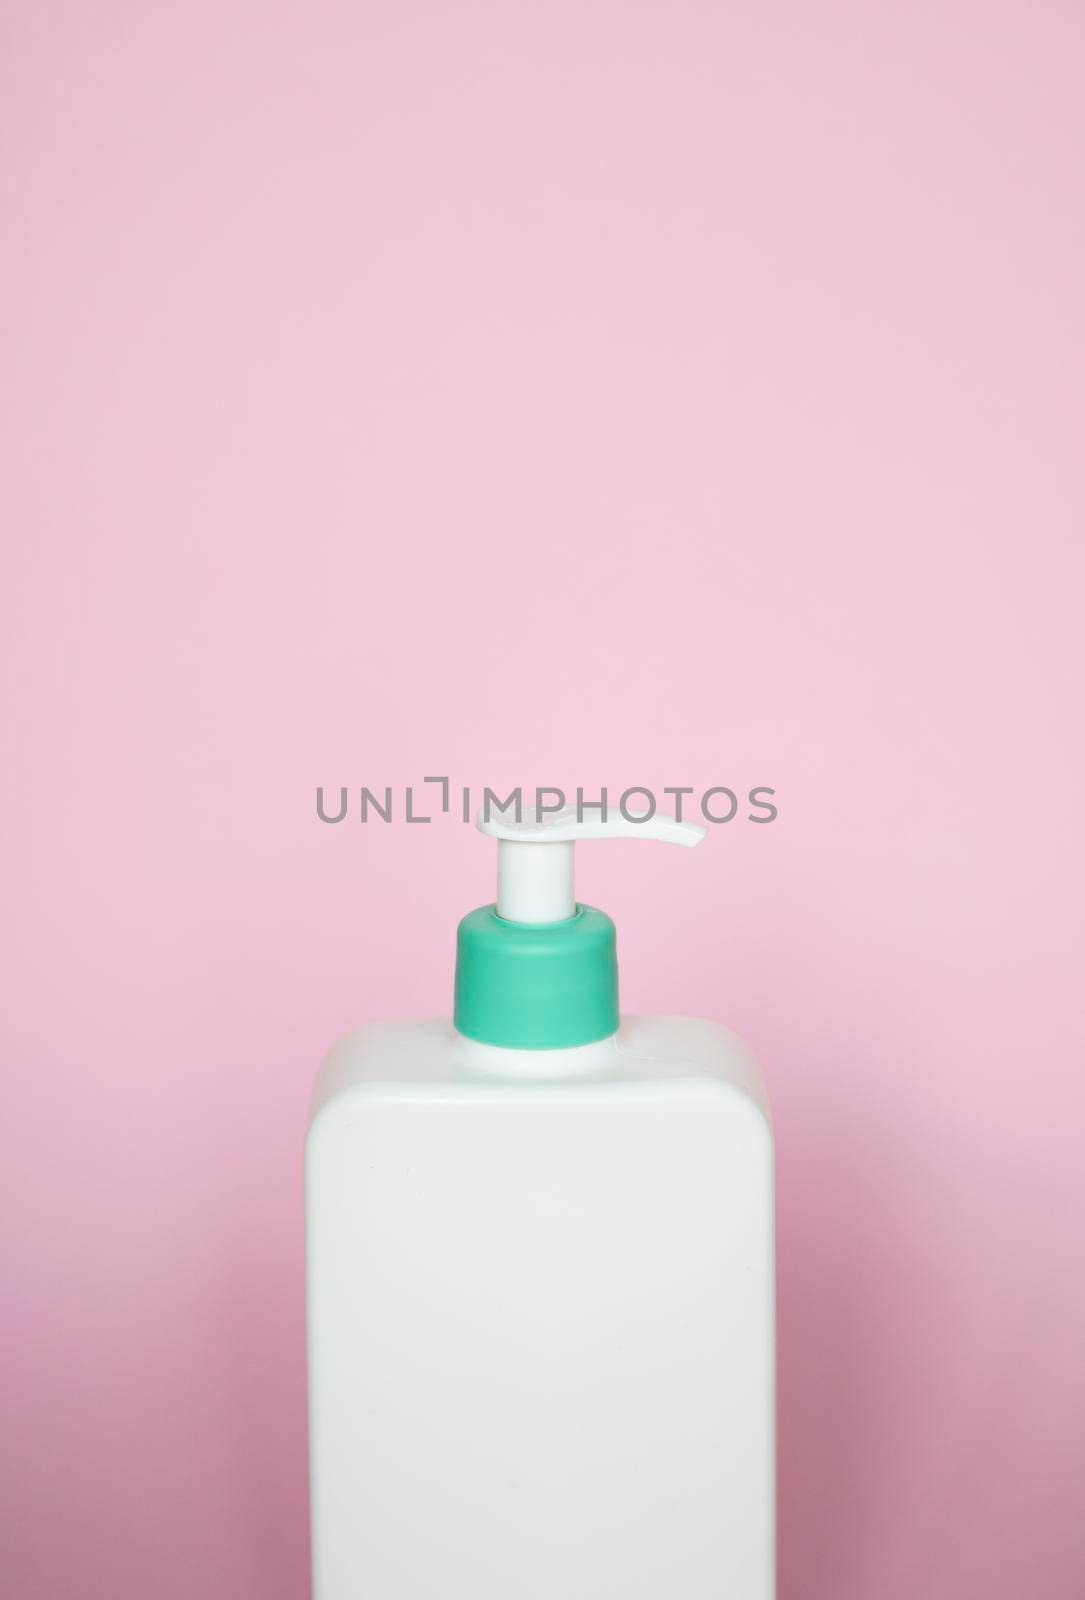 Large white cosmetic plastic bottle with pump dispenser pump and green cap on pink background. Liquid container for gel, lotion, cream, shampoo, bath foam. by vovsht